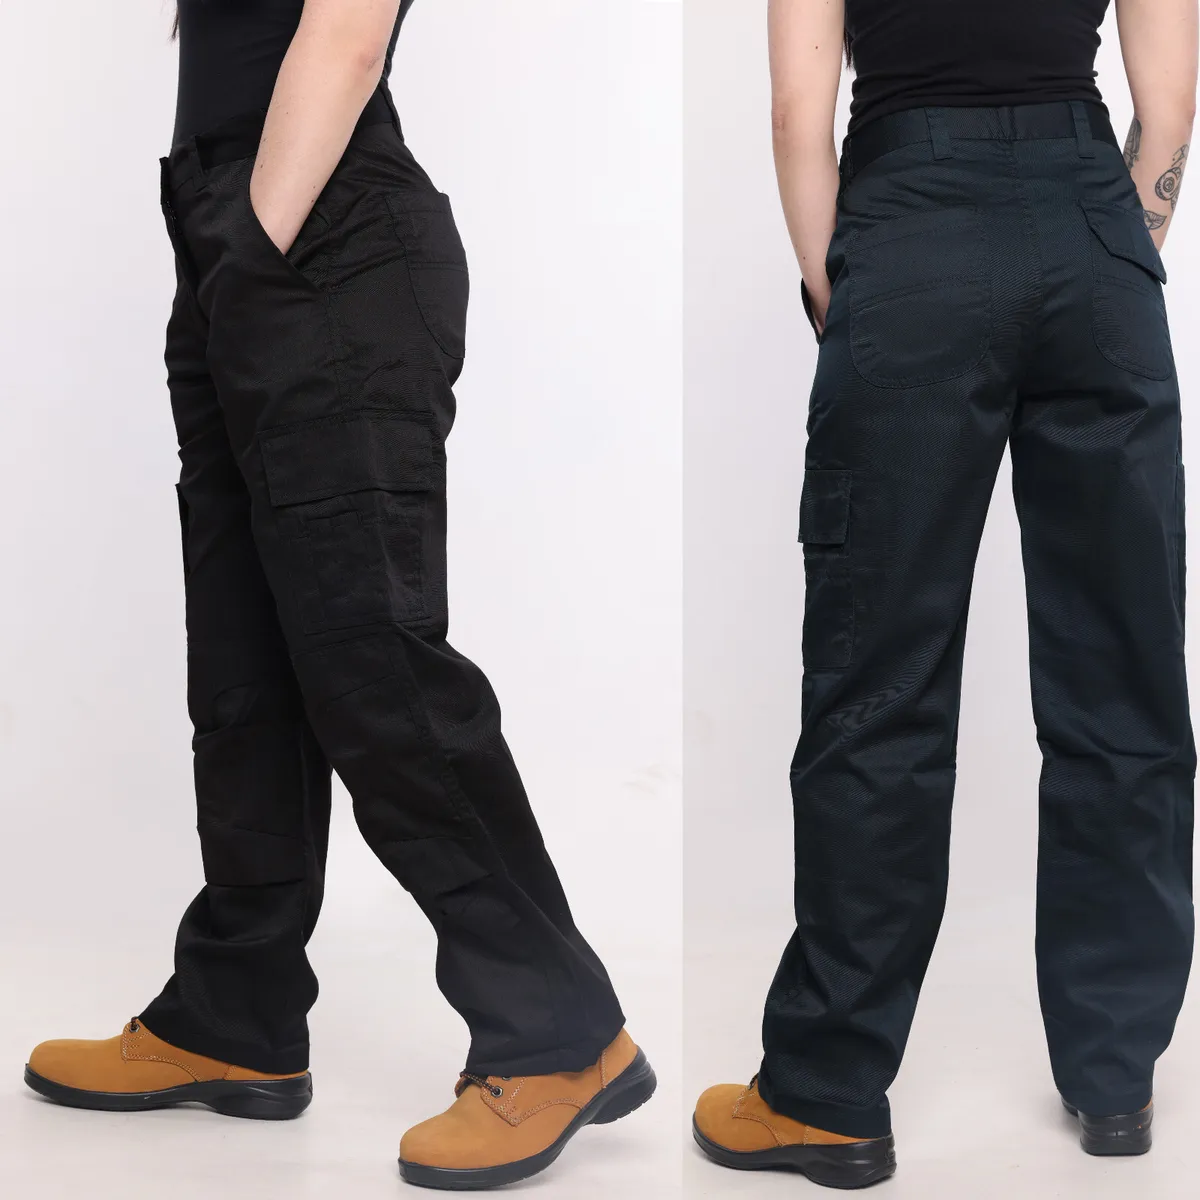 Ladies COMBAT CARGO Work Trousers Size 8 to 20 Short Reg Long in Black or  Navy